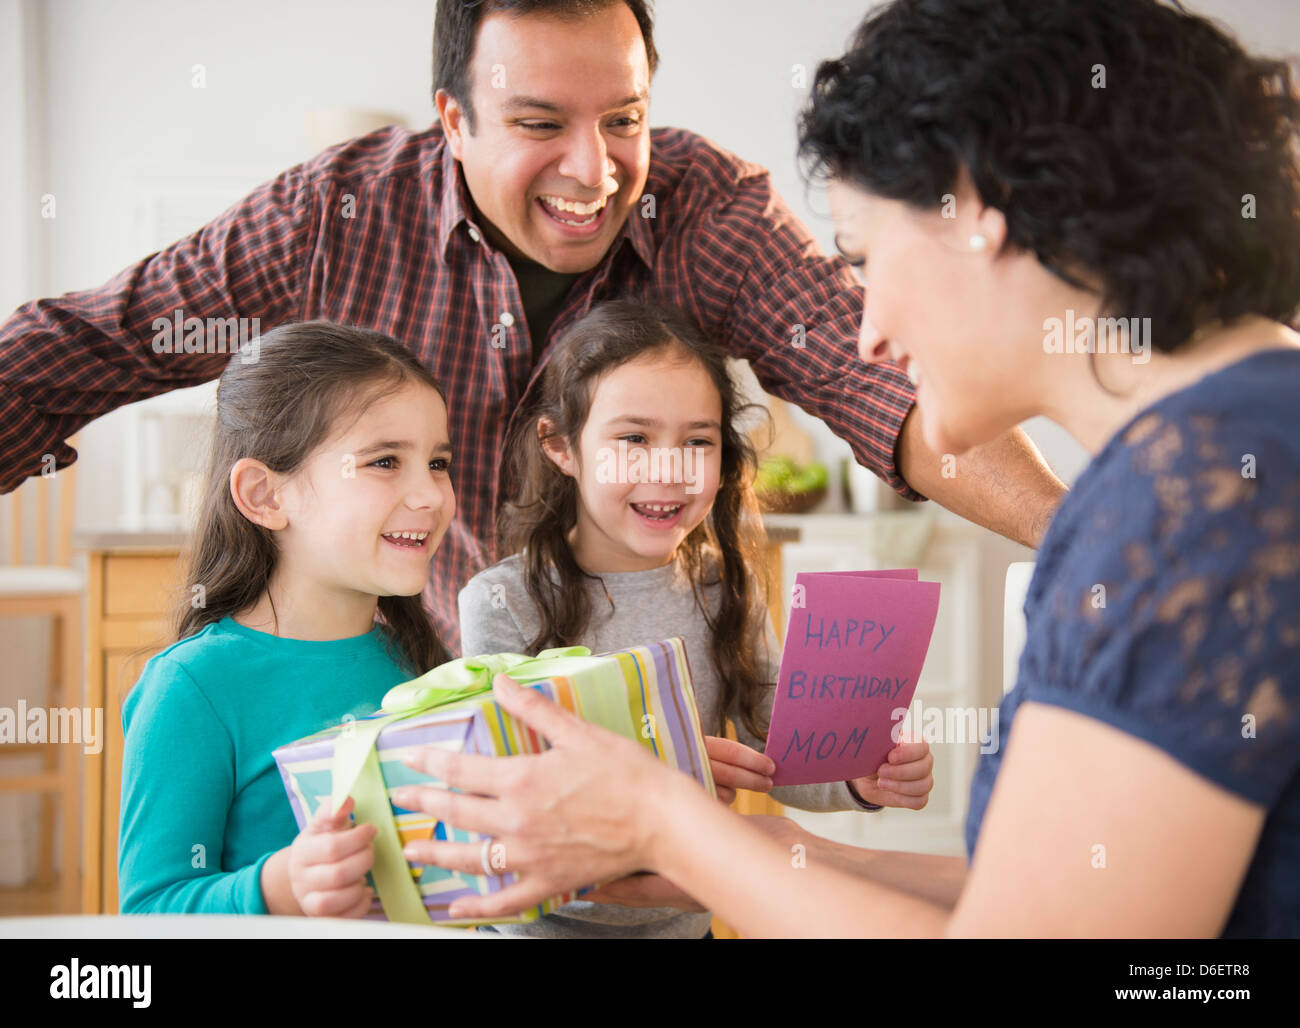 Smiling family celebrating girl's birthday Banque D'Images